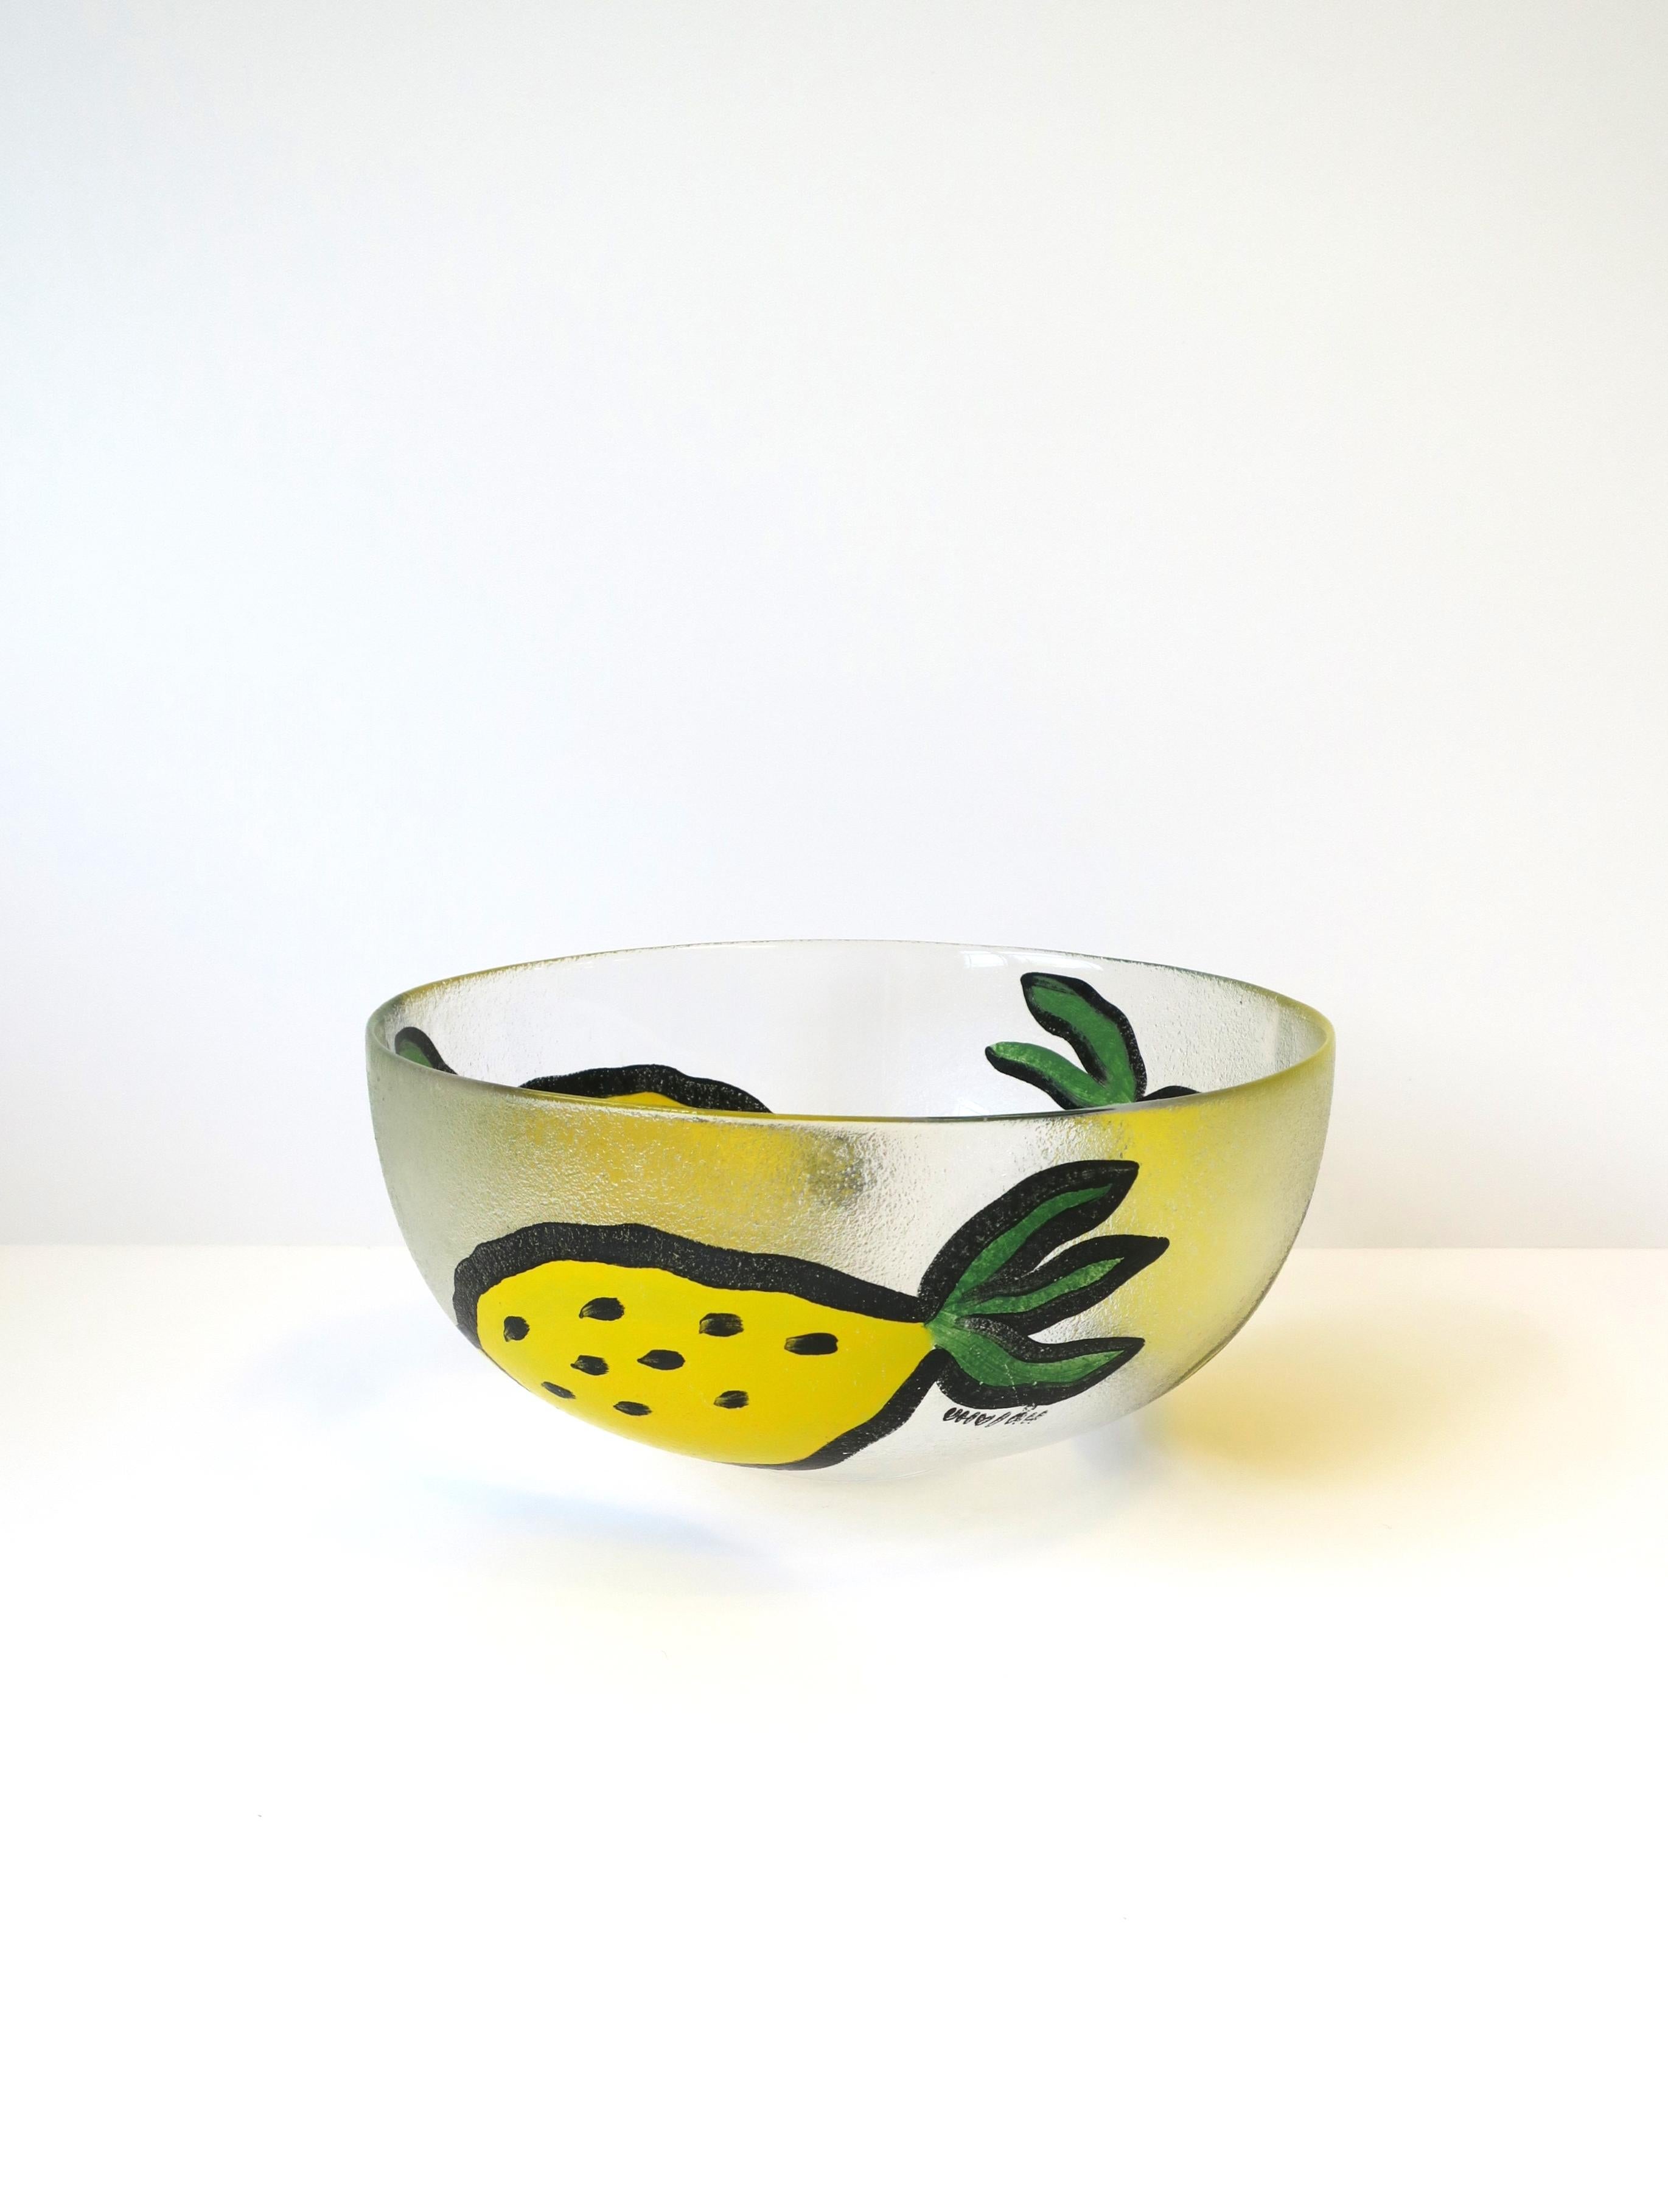 A beautiful Postmodern Swedish art glass centerpiece bowl by artist and designer Ulrica Hydman-Vallien, circa 1990s, for Kosta Boda, Sweden. Centerpiece bowl has three large hand-painted lemons on textured exterior glass surface, with artists